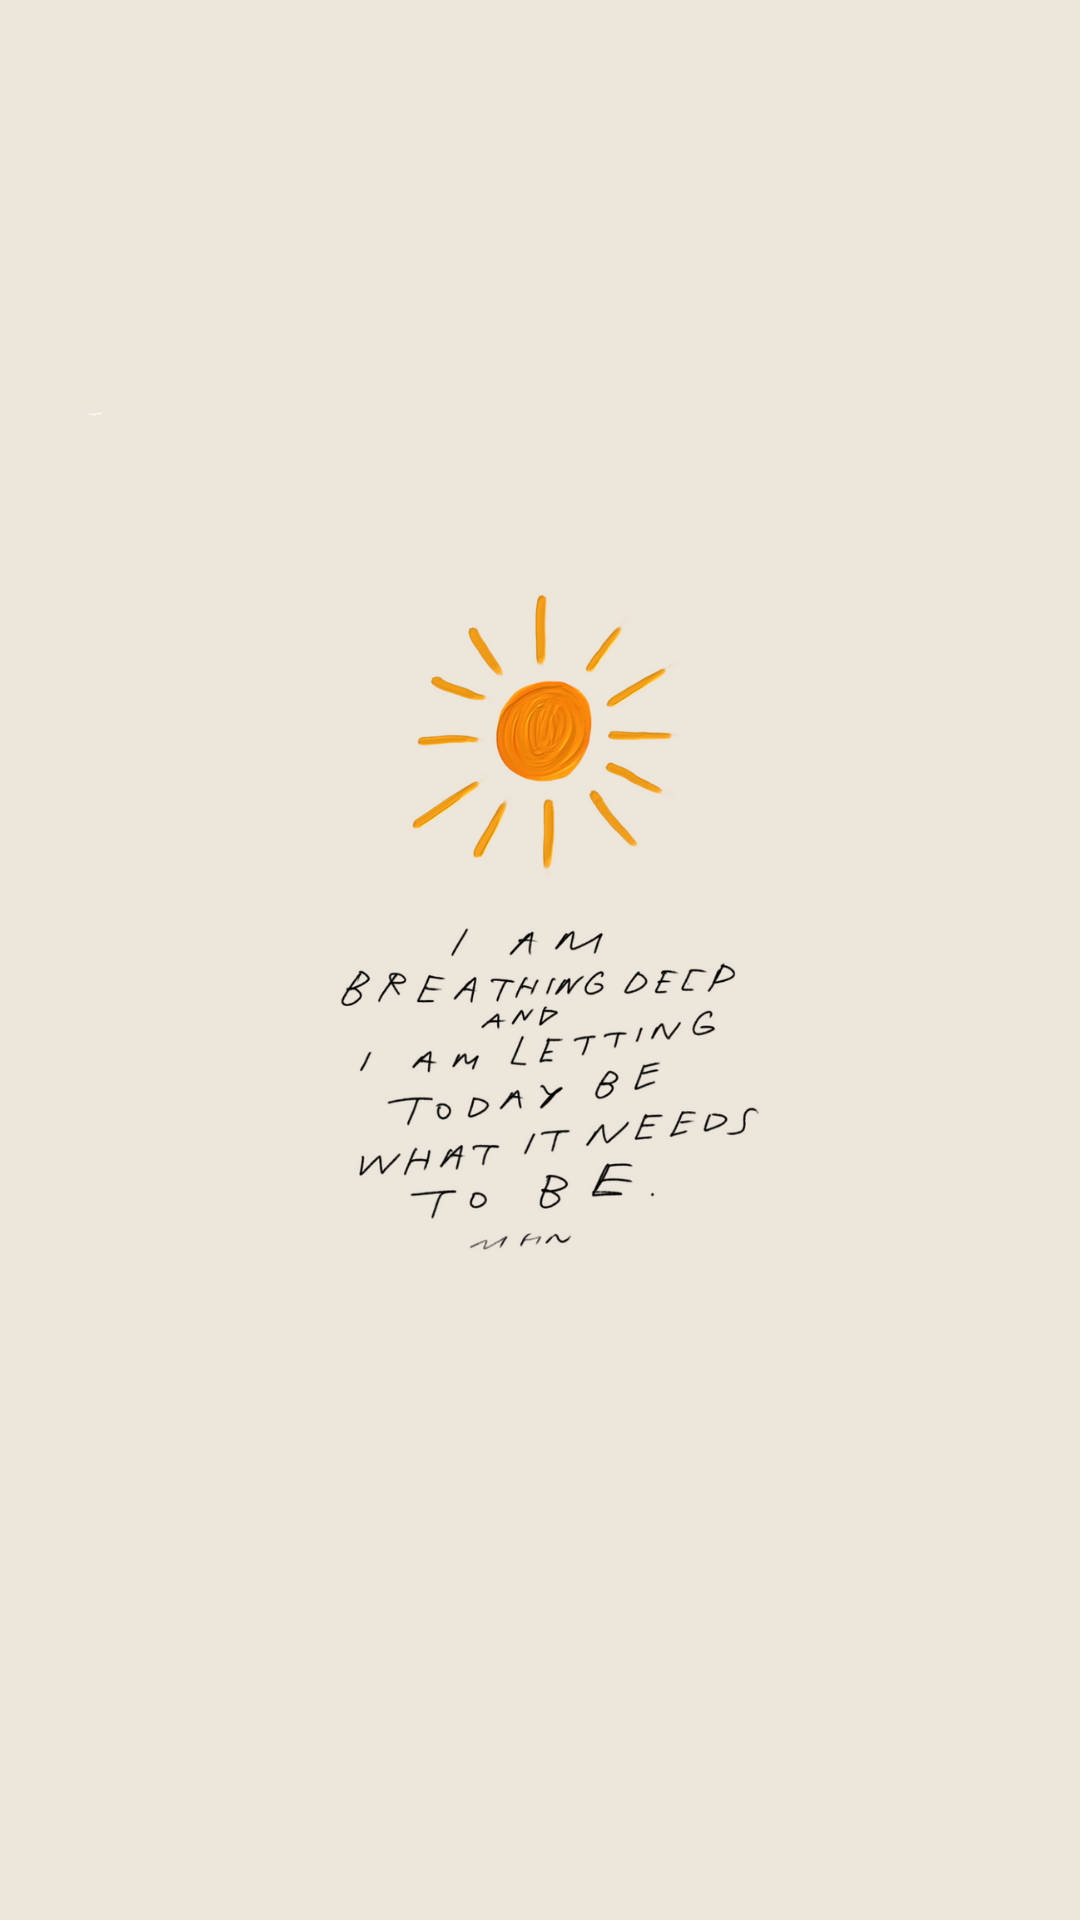 Affirmation With Painted Sun